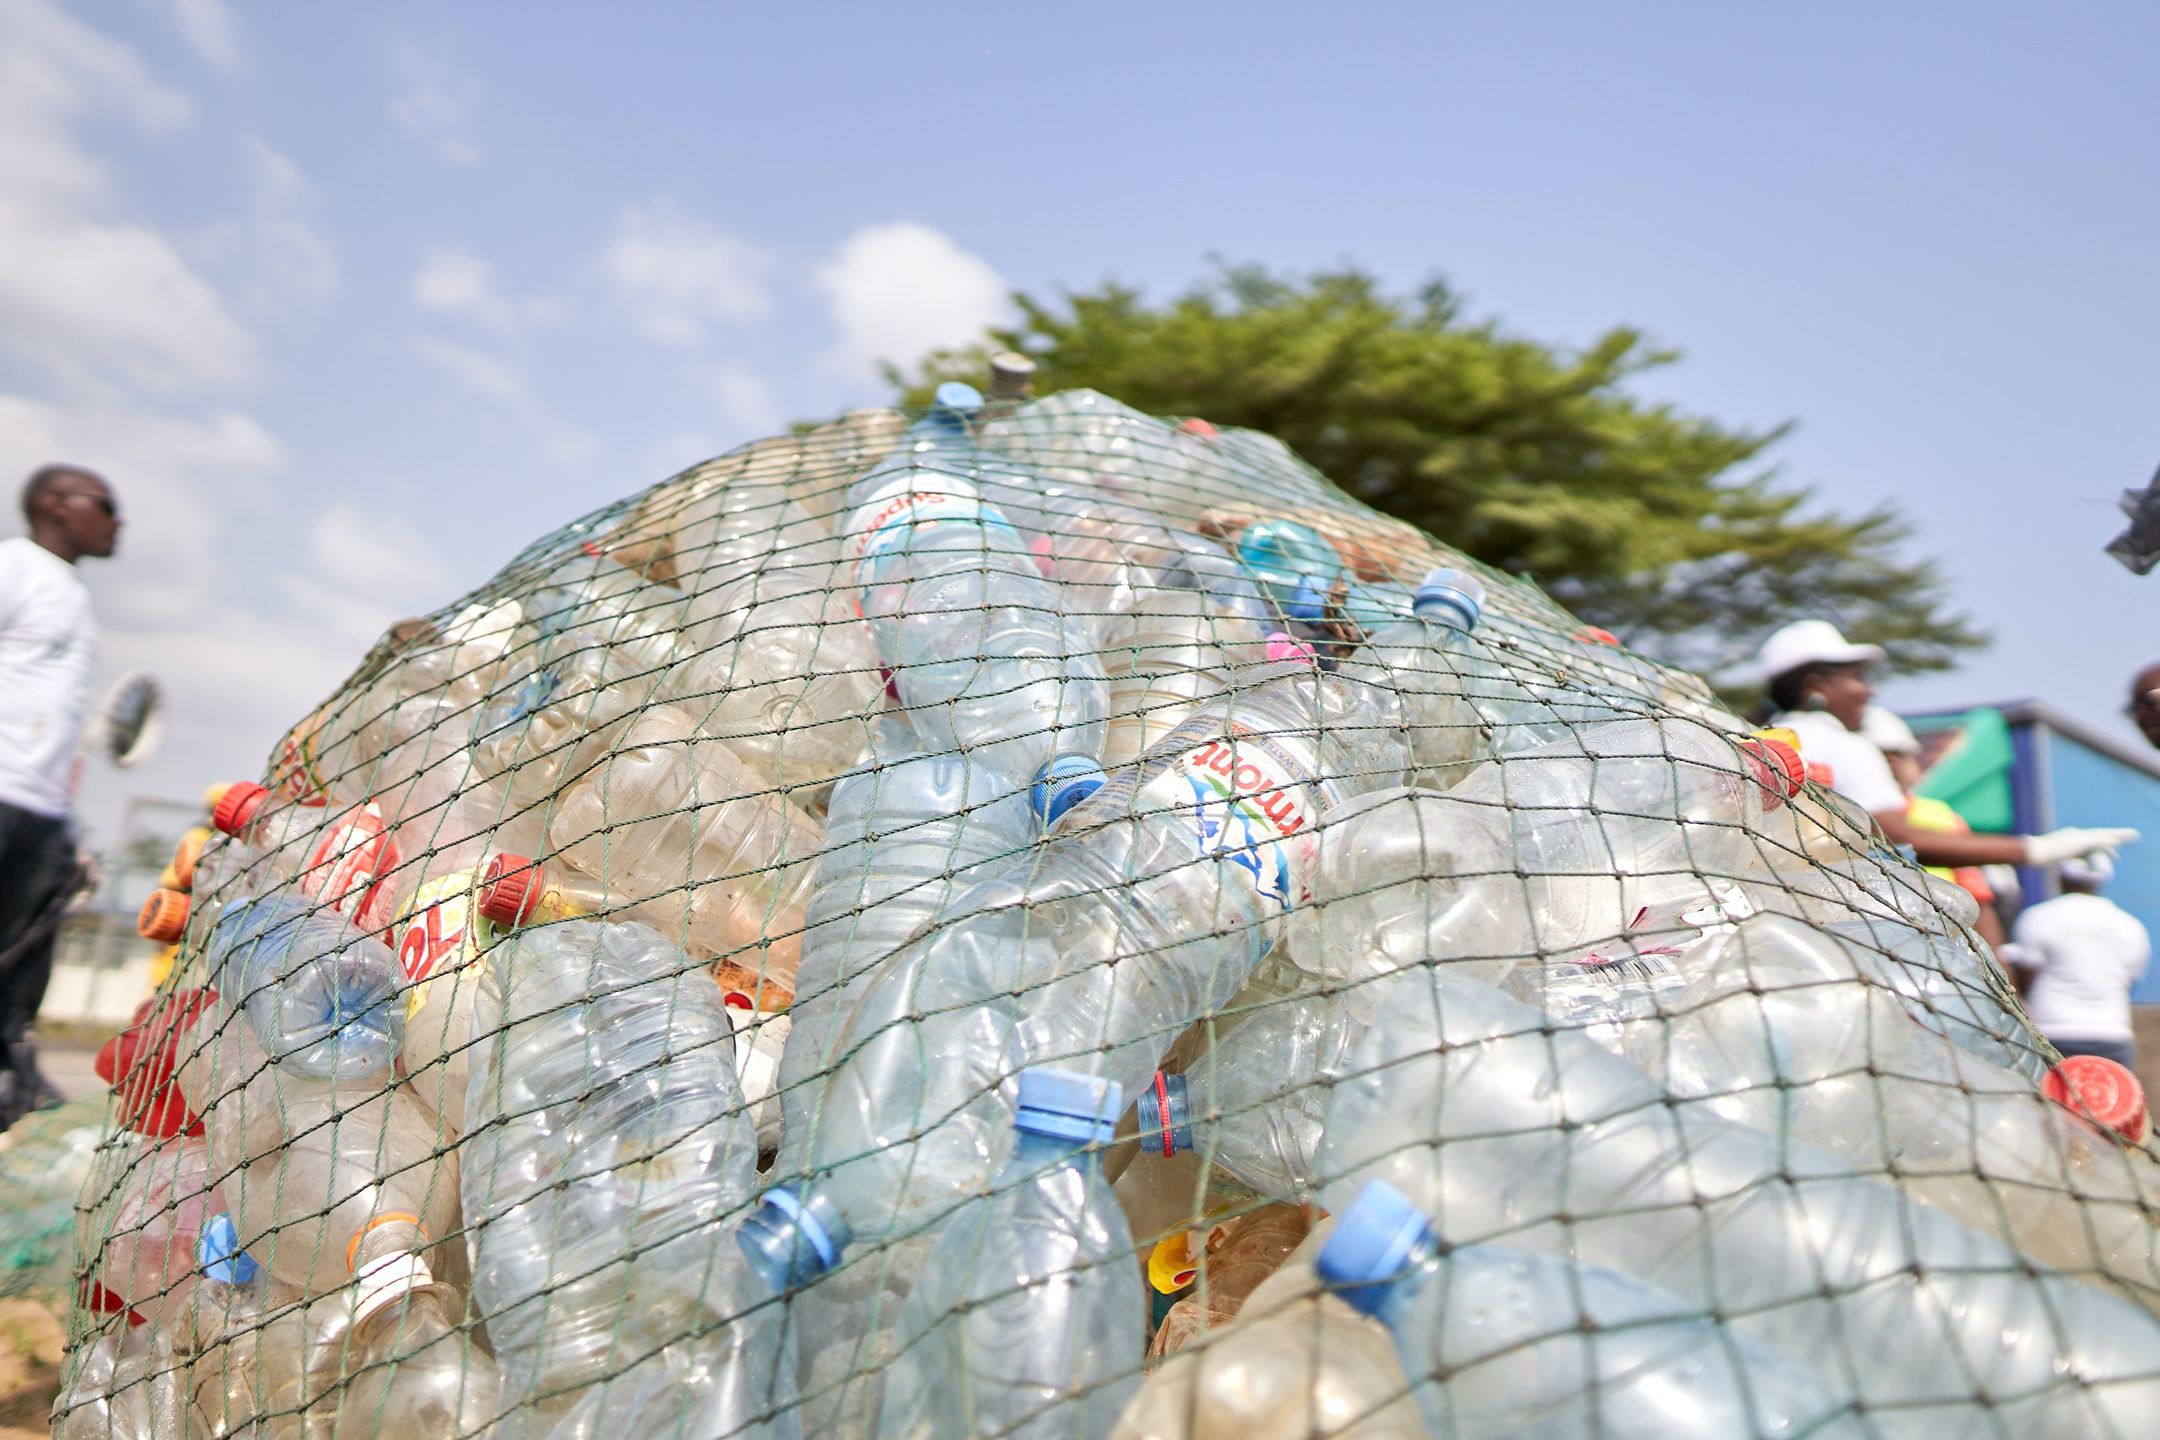 How to Recycle PET Plastic Bottles?